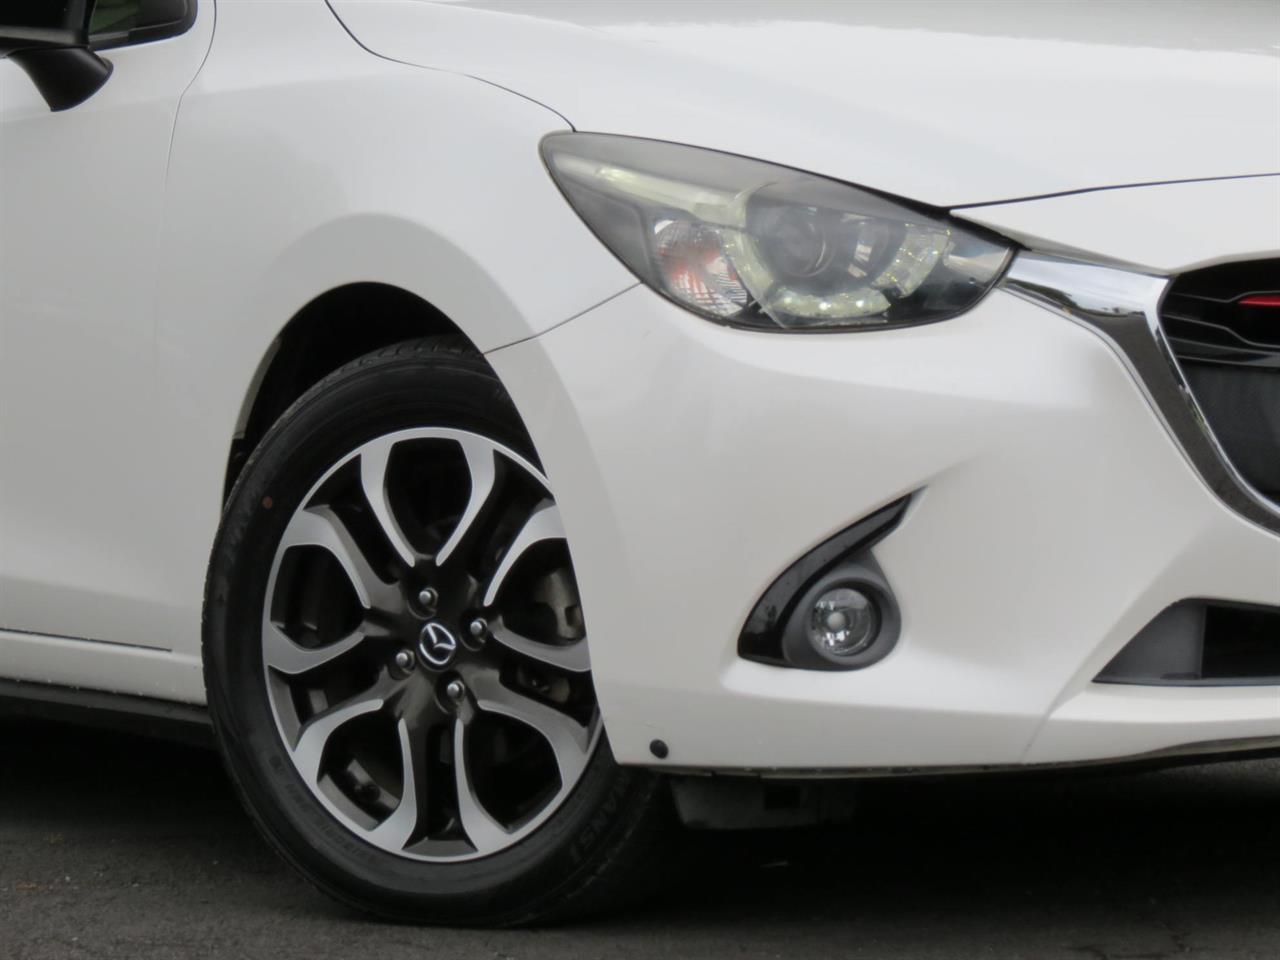 2014 Mazda Demio only $45 weekly